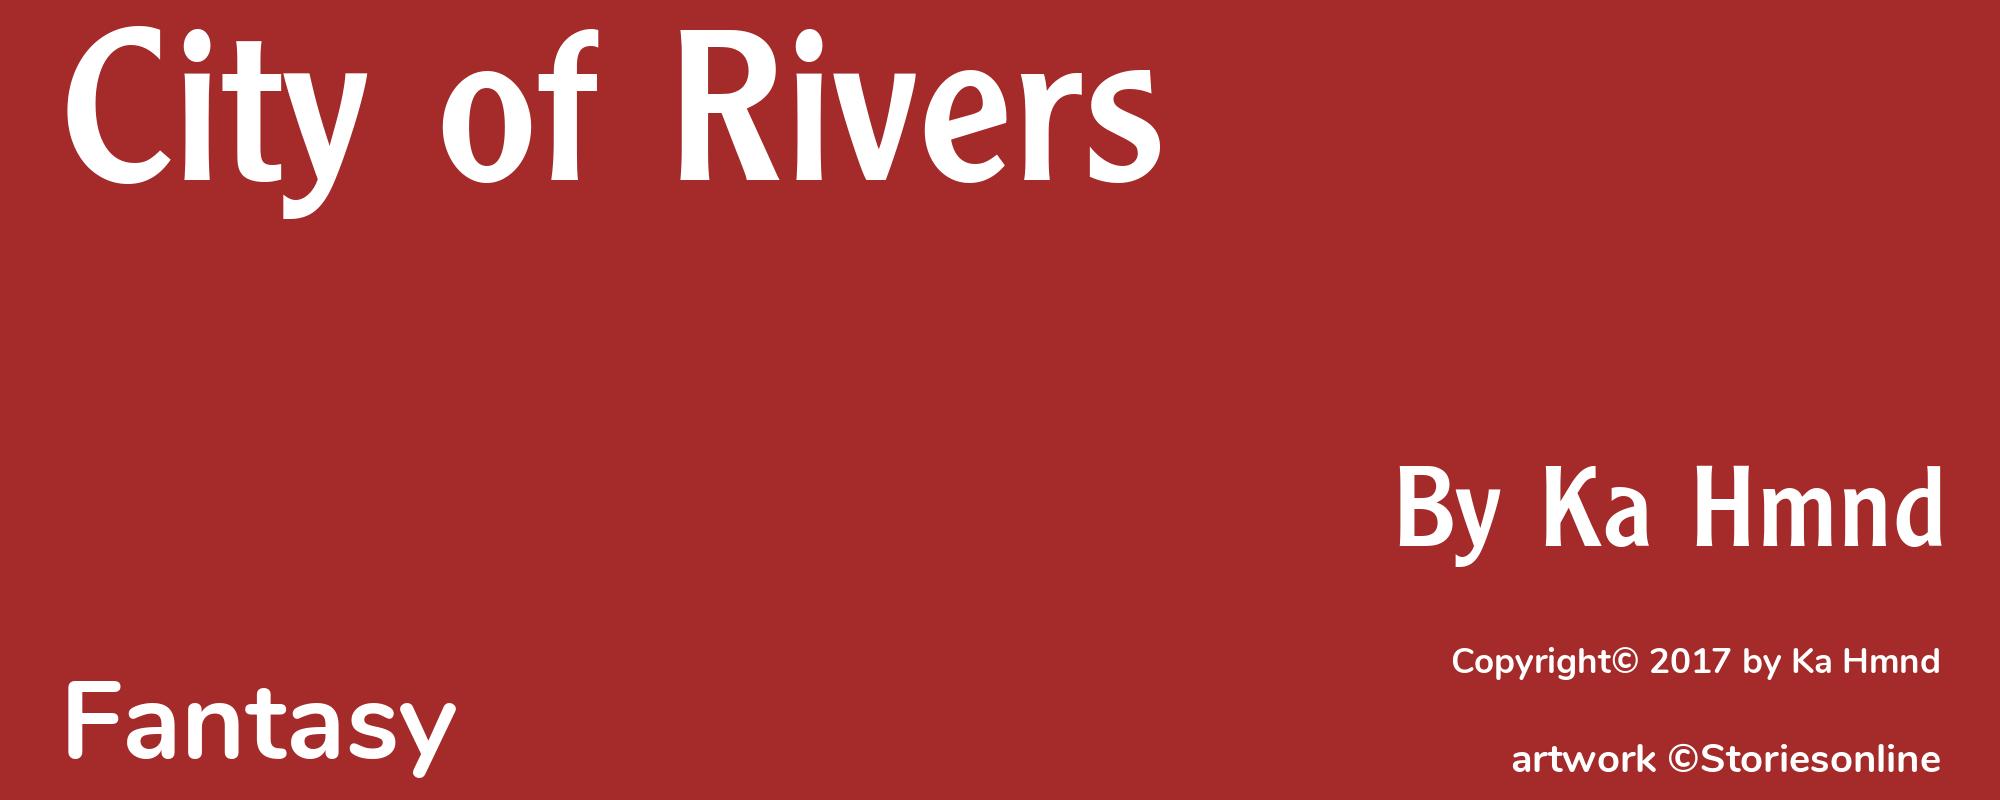 City of Rivers - Cover